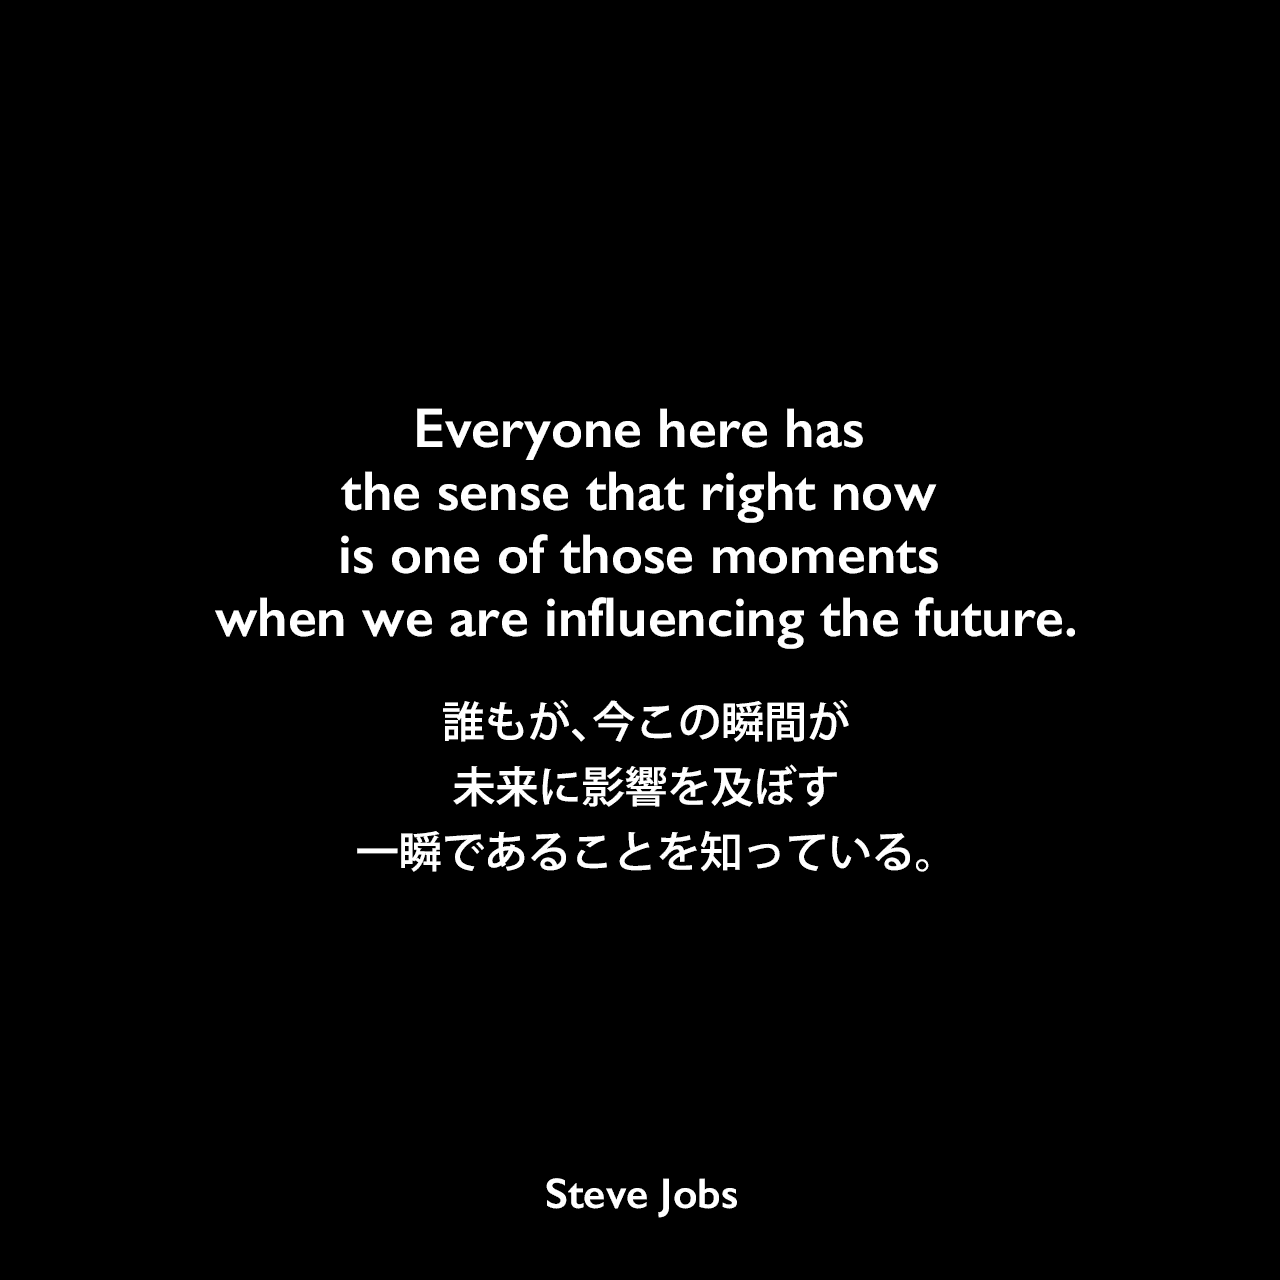 Everyone here has the sense that right now is one of those moments when we are influencing the future.誰もが、今この瞬間が未来に影響を及ぼす一瞬であることを知っている。Steve Jobs